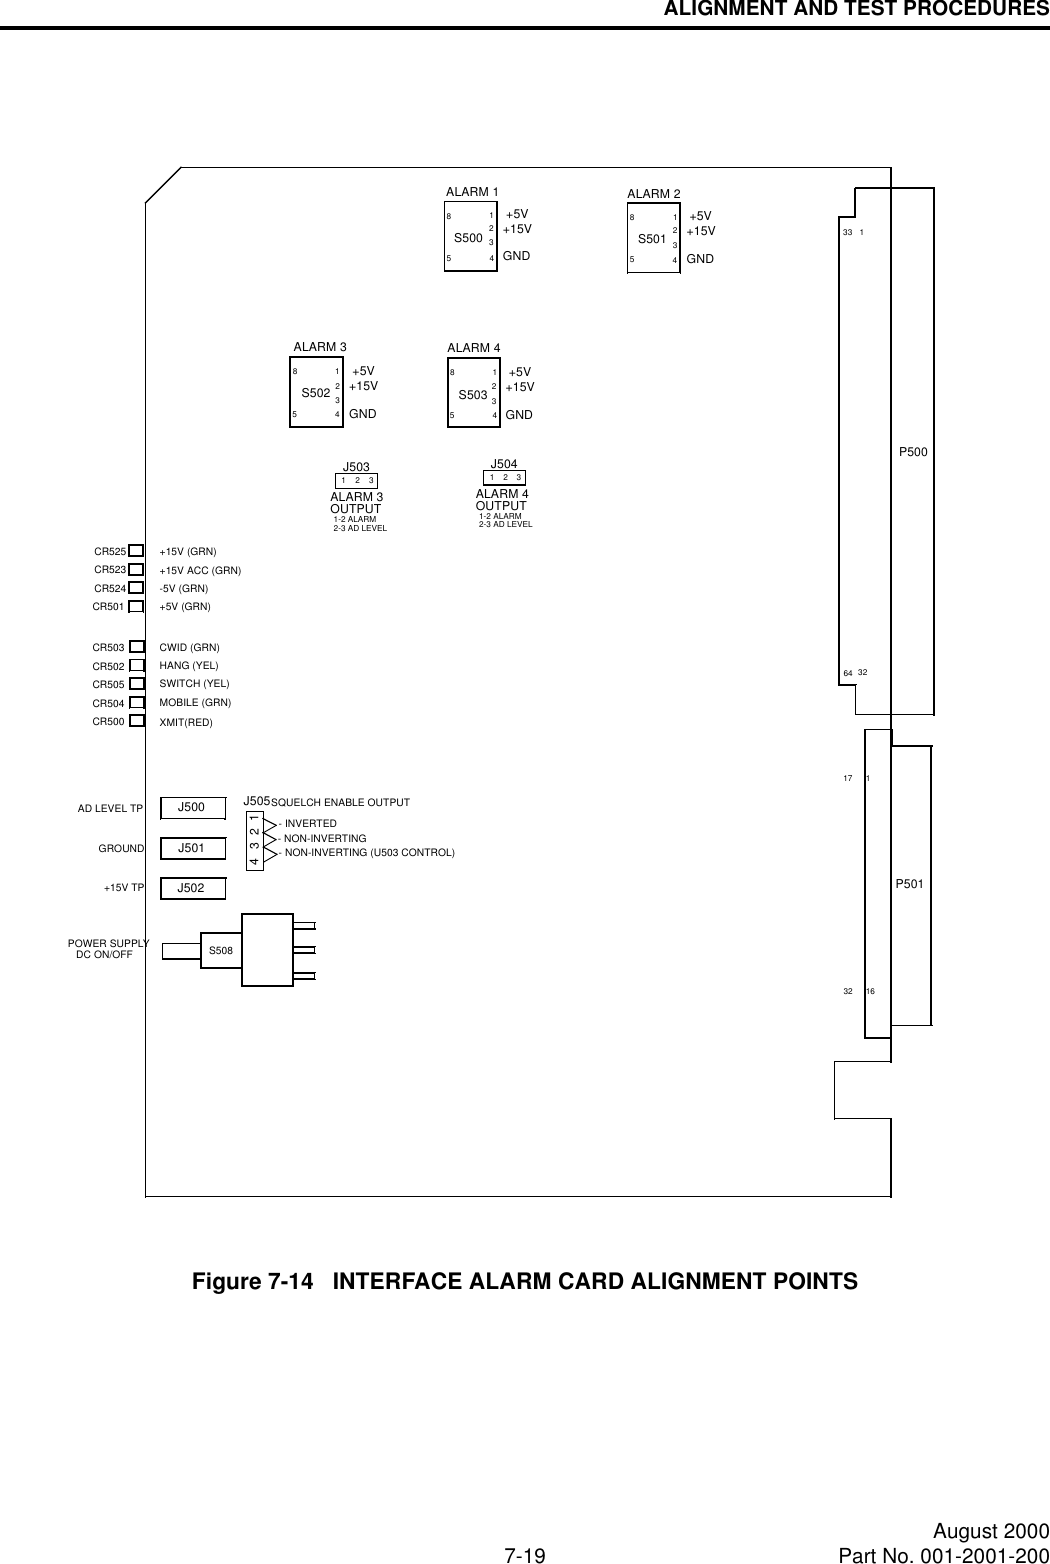 ALIGNMENT AND TEST PROCEDURES7-19 August 2000Part No. 001-2001-200Figure 7-14   INTERFACE ALARM CARD ALIGNMENT POINTS+15V (GRN)+15V ACC (GRN)-5V (GRN)+5V (GRN)CWID (GRN)HANG (YEL)SWITCH (YEL)MOBILE (GRN)XMIT(RED)CR525CR523CR524S508J502J501CR500CR504CR505CR502CR503CR501S503S501145818P500P50111732 1632641334581S50245J500S5001458J503 J50414J505ALARM 3 ALARM 4ALARM 2ALARM 1+5V+15VGND23+5V+15VGND23+5V+15VGND23+5V+15VGND23ALARM 3OUTPUT123 1321-2 ALARM2-3 AD LEVELALARM 4OUTPUT1-2 ALARM2-3 AD LEVELAD LEVEL TPGROUND+15V TP32- NON-INVERTING (U503 CONTROL)- NON-INVERTING- INVERTEDSQUELCH ENABLE OUTPUTPOWER SUPPLYDC ON/OFF